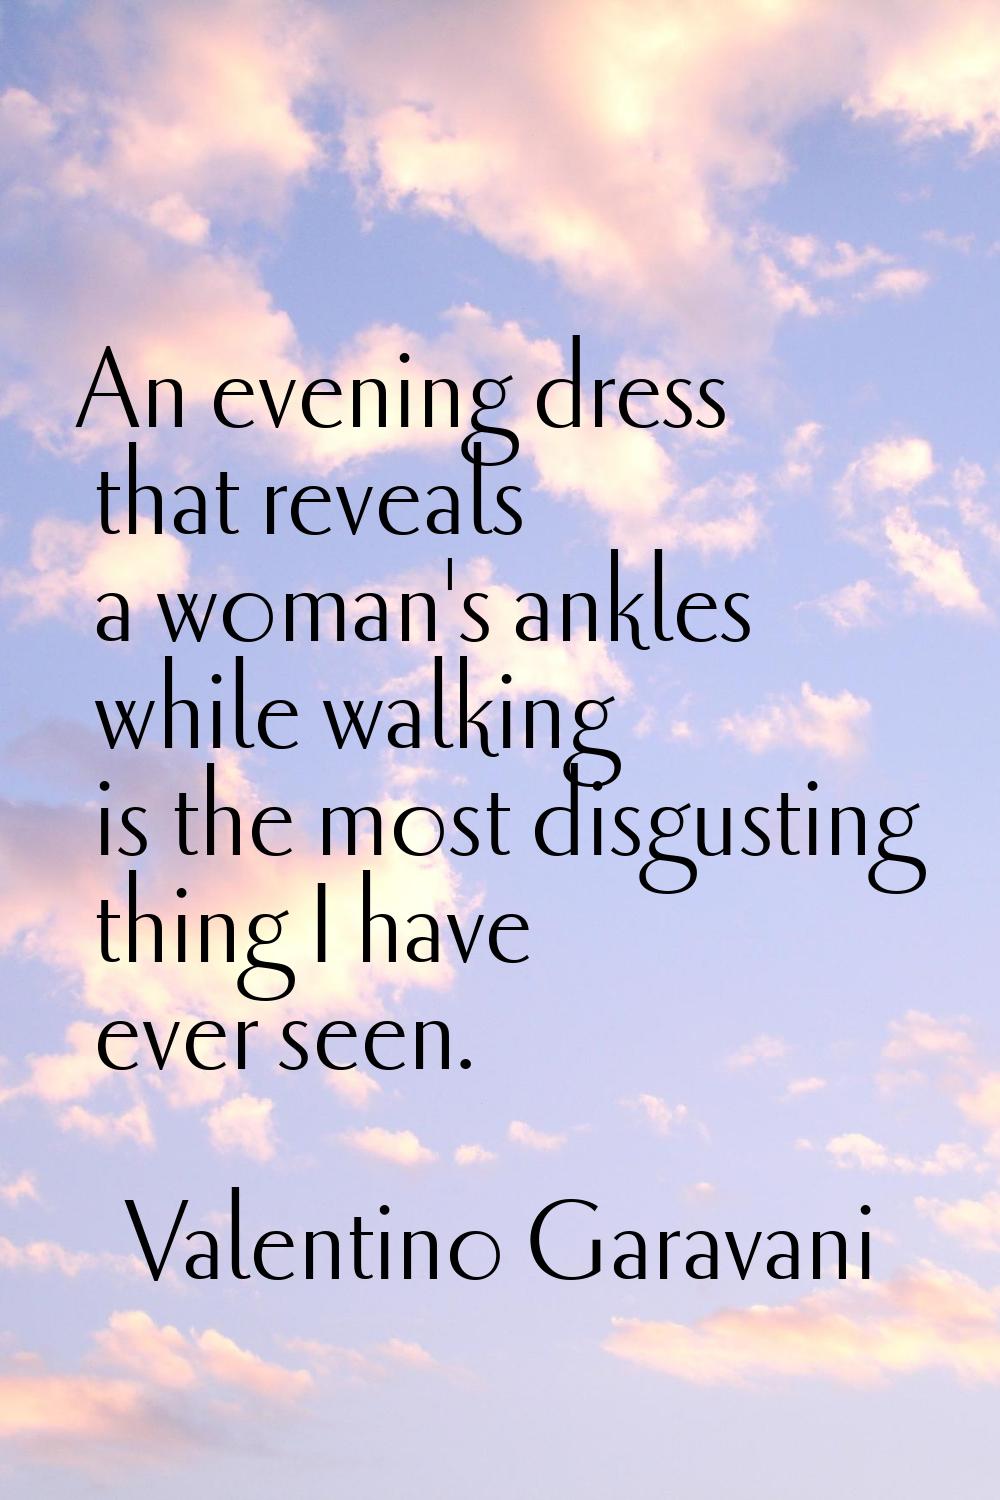 An evening dress that reveals a woman's ankles while walking is the most disgusting thing I have ev